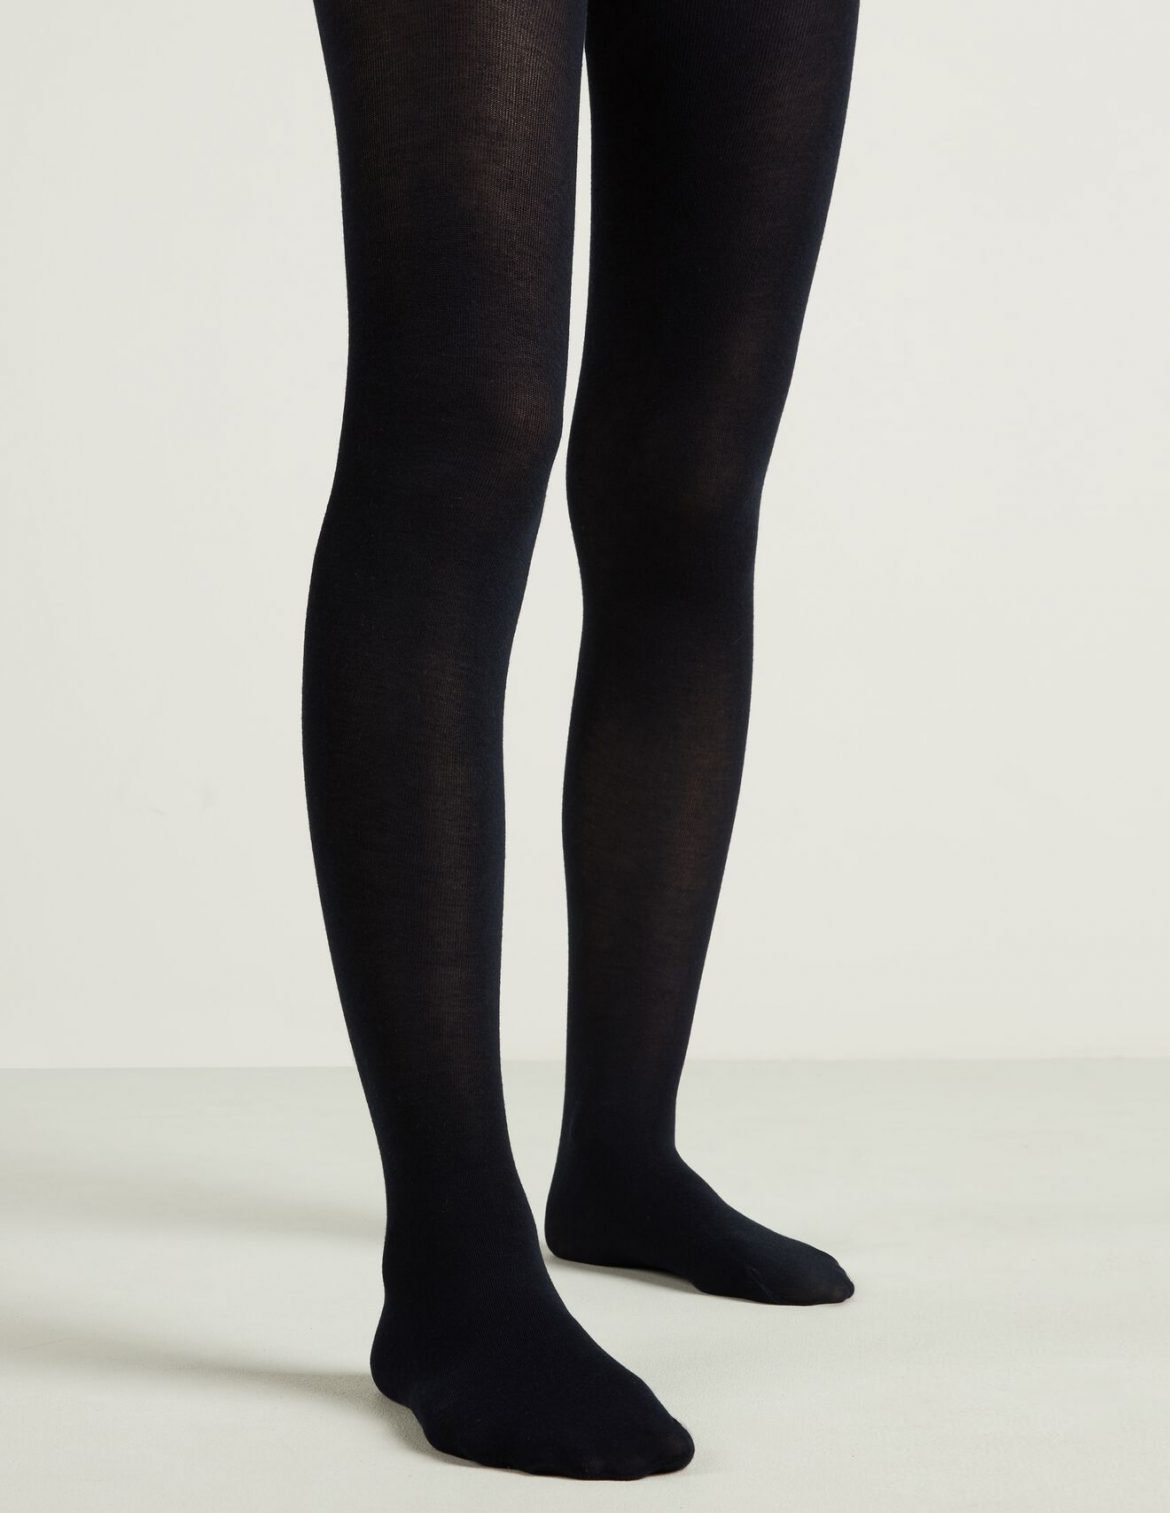 Cashmere Hosiery: 16 Cashmere Tights & Hold Ups | Esty Lingerie